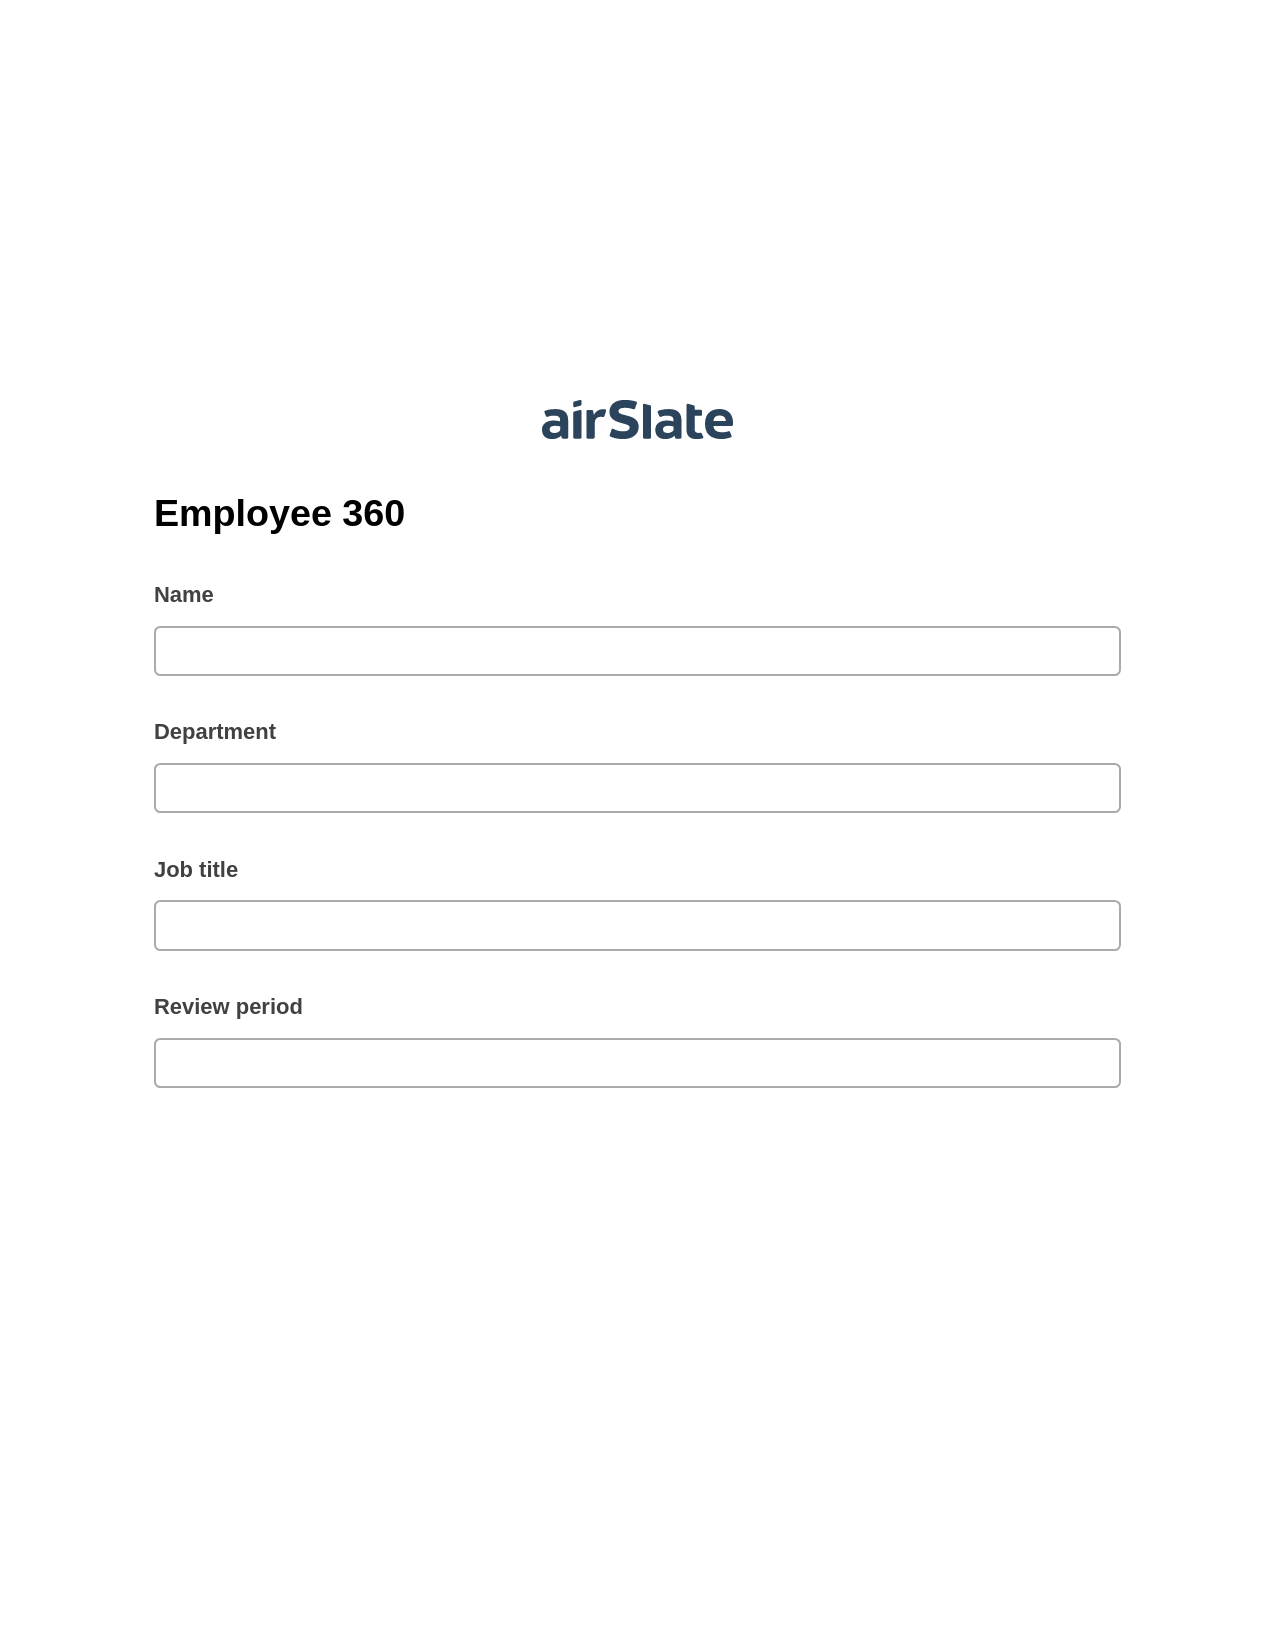 Multirole Employee 360 Pre-fill from another Slate Bot, Create MS Dynamics 365 Records Bot, Post-finish Document Bot